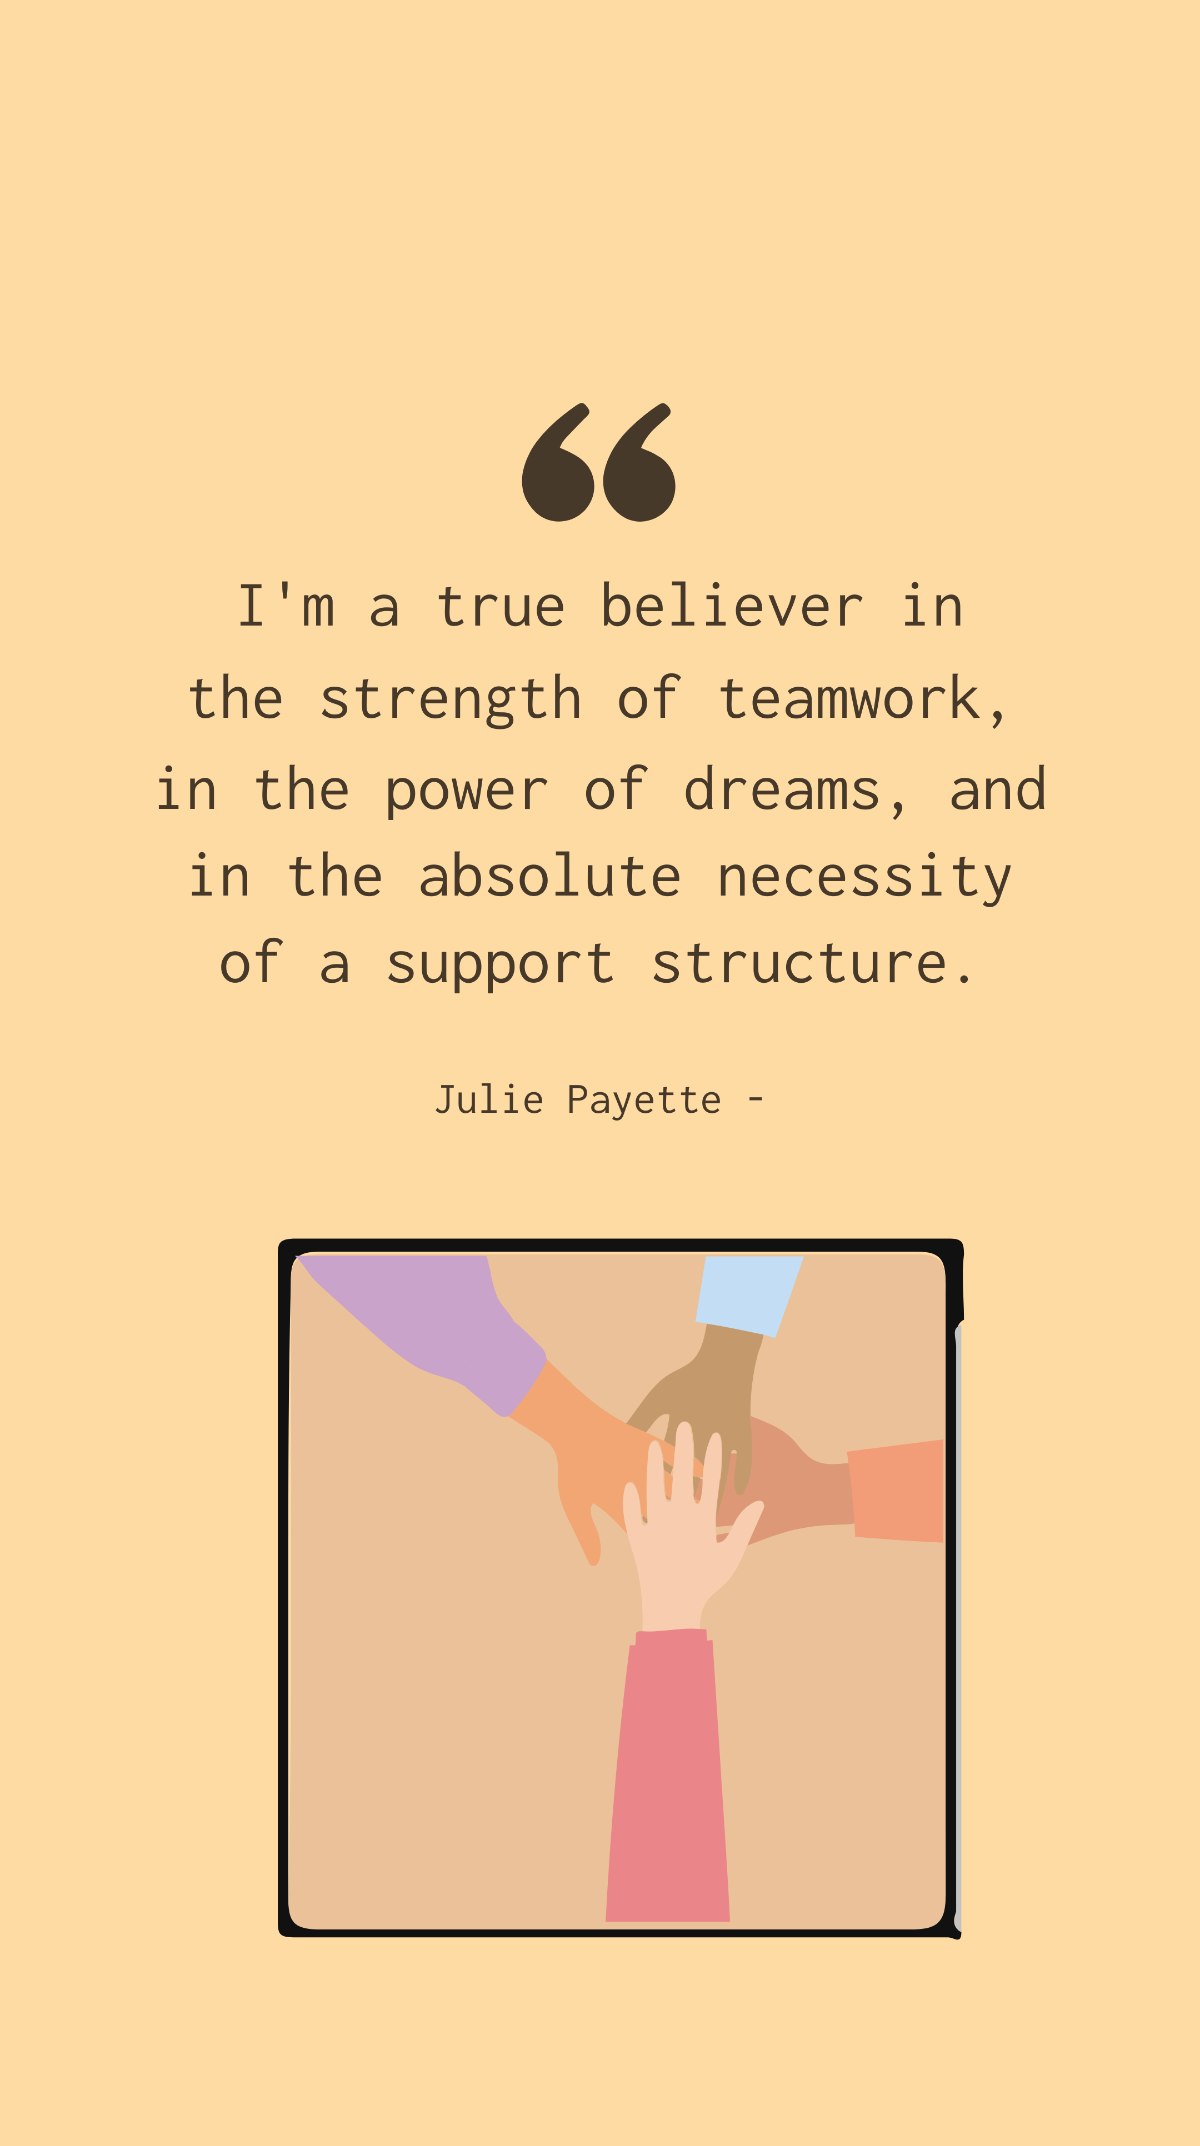 Julie Payette - I'm a true believer in the strength of teamwork, in the power of dreams, and in the absolute necessity of a support structure. Template